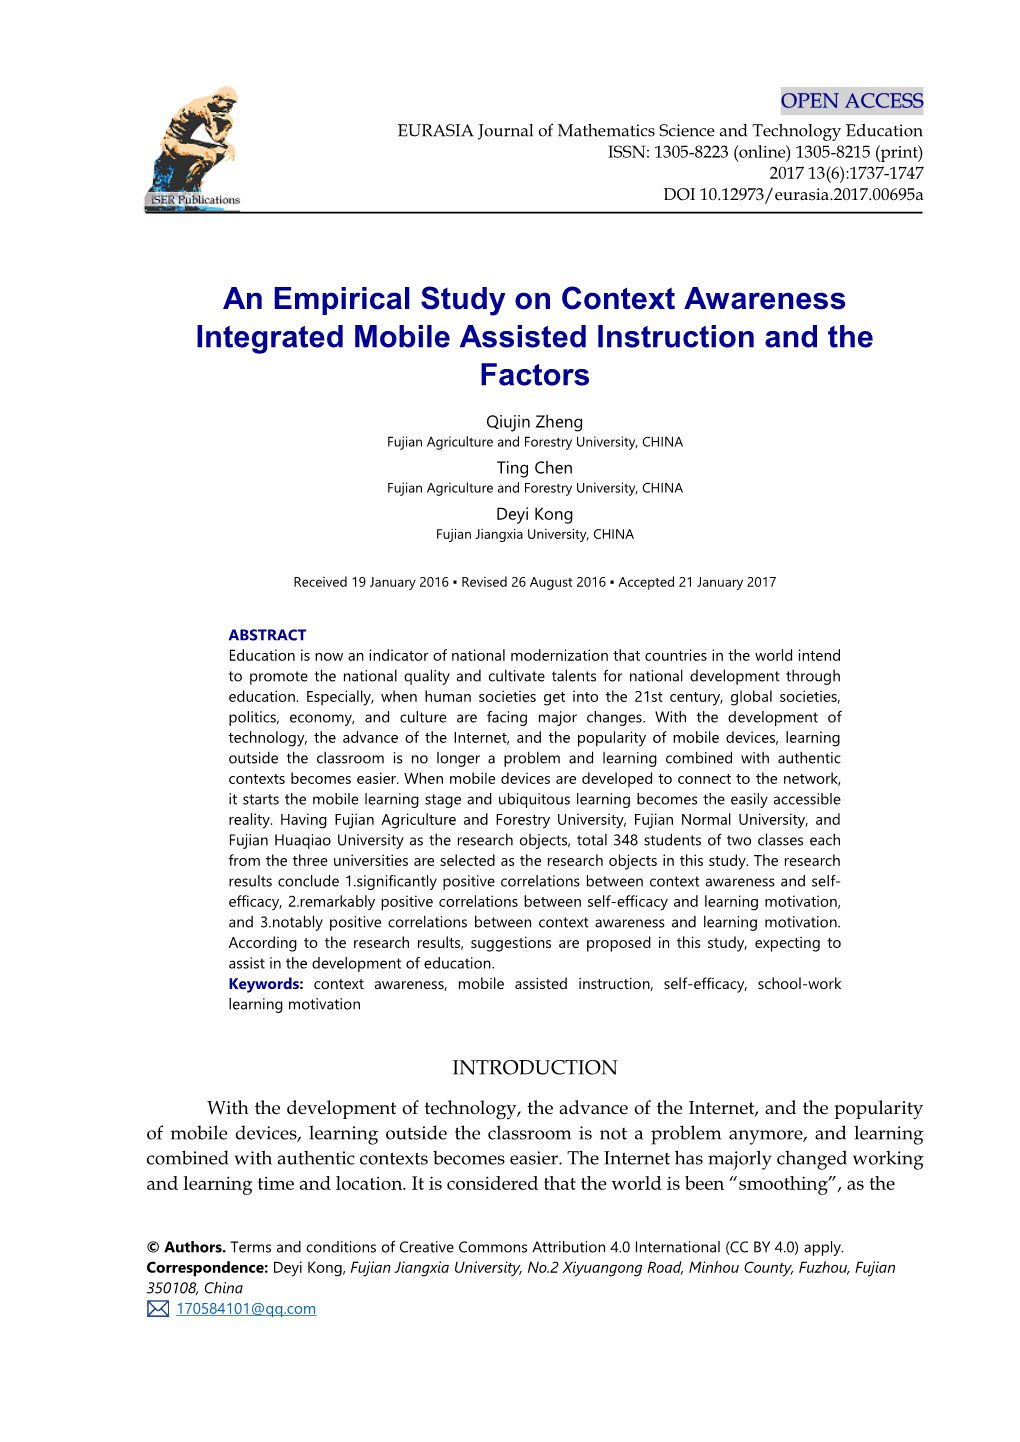 An Empirical Study on Context Awareness Integrated Mobile Assisted Instruction and the Factors